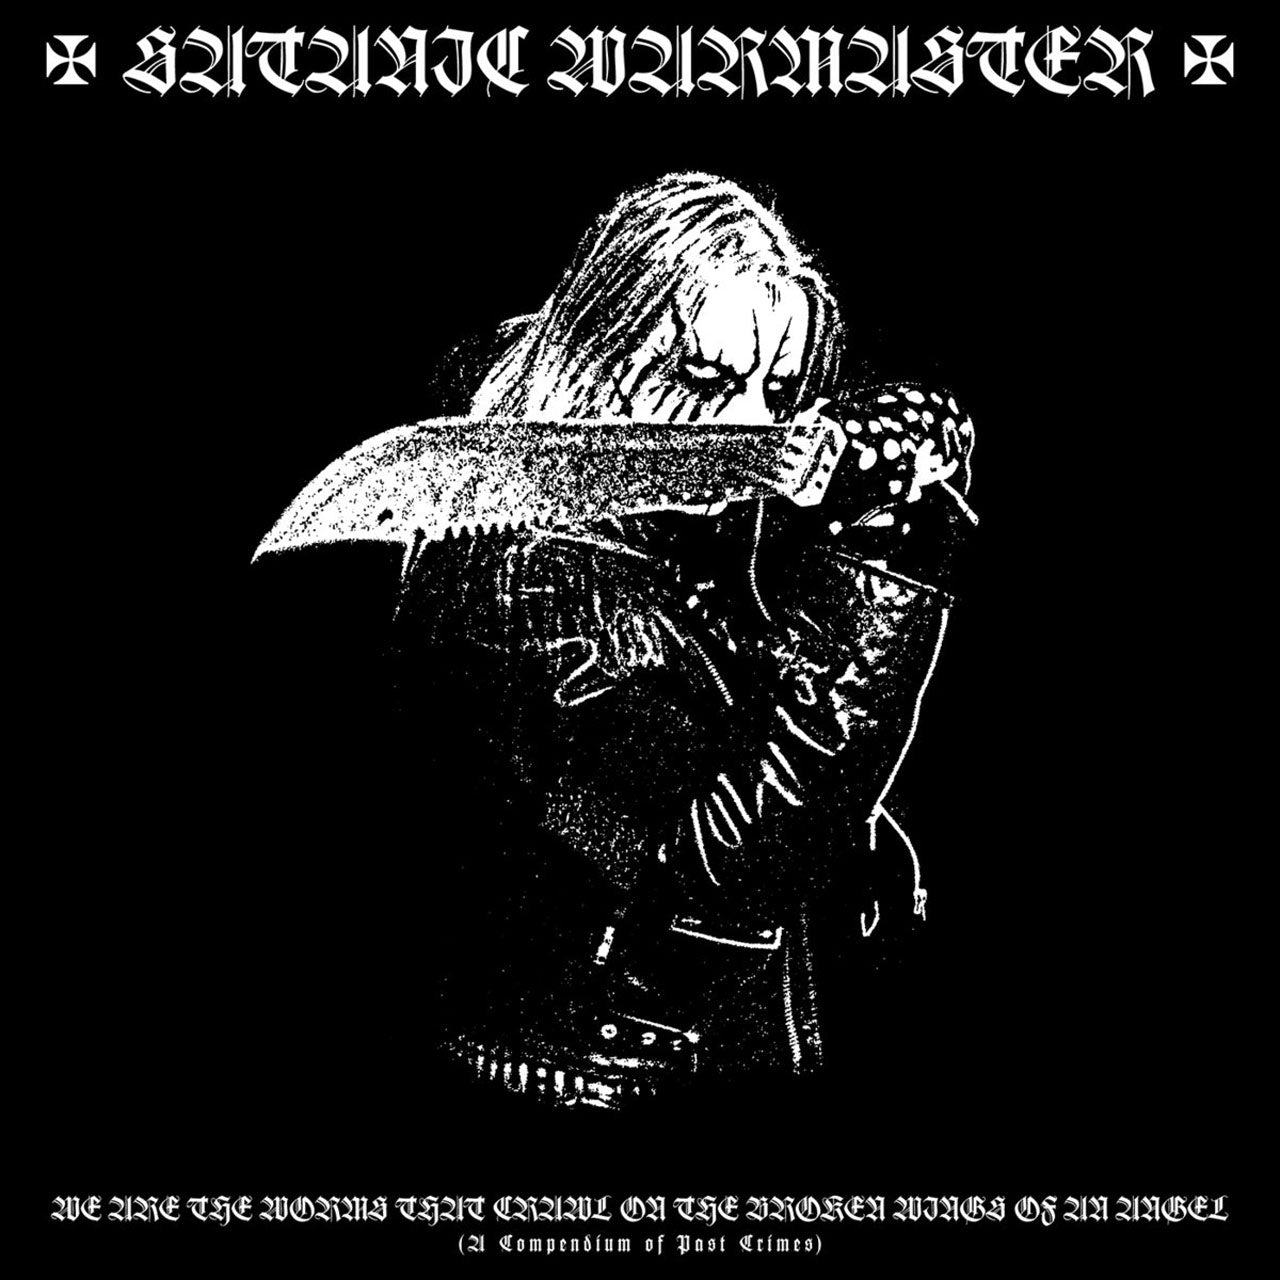 Satanic Warmaster - We are the Worms that Crawl on the Broken Wings of an Angel (A Compendium of Past Crimes) (CD)